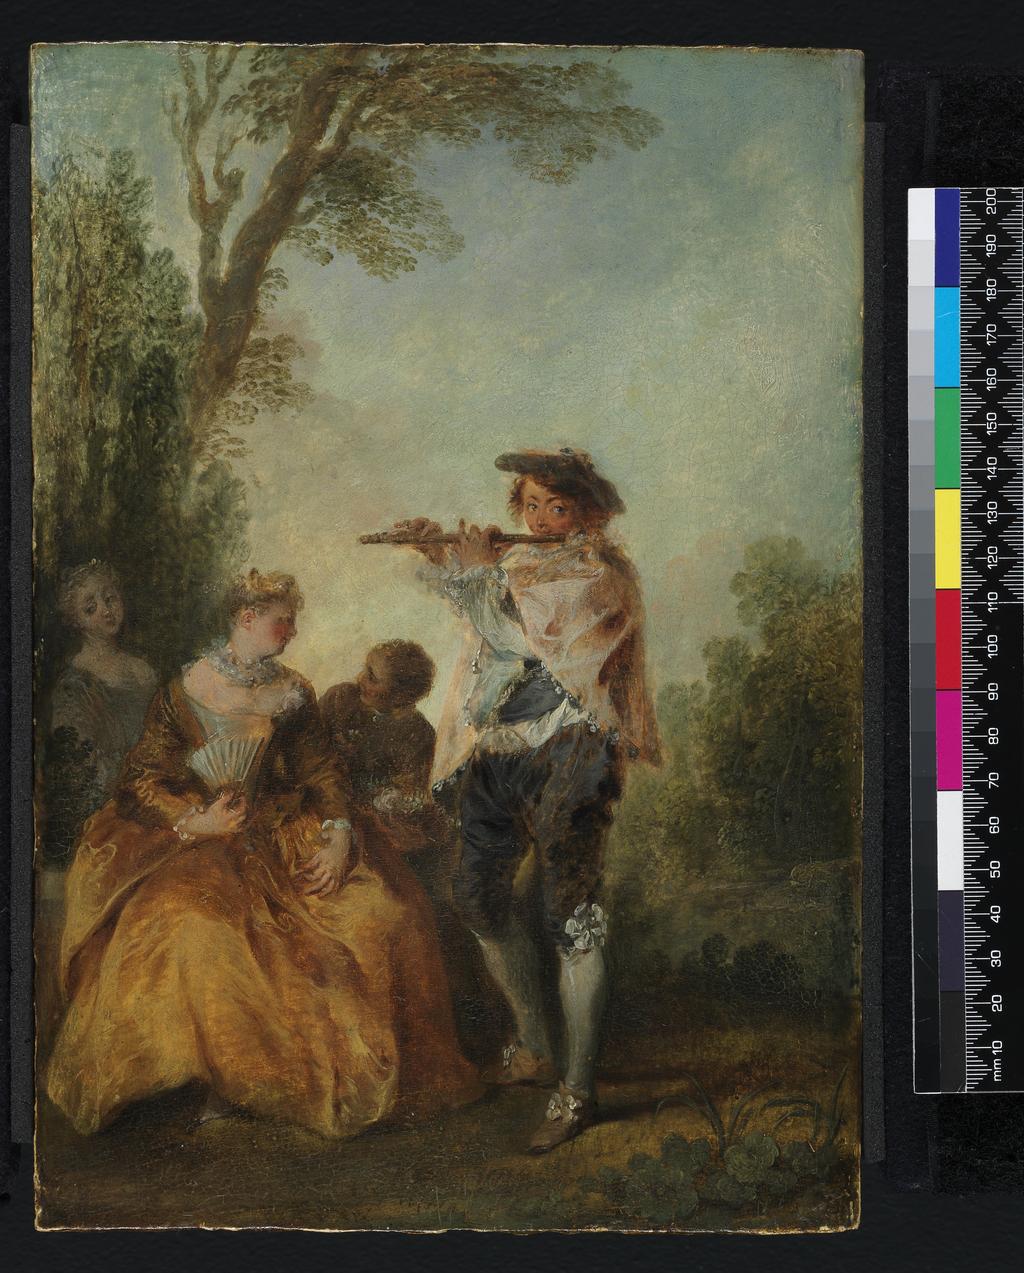 An image of Par une tendre chansonette... Lancret, Nicolas (French, 1690-1743). Oil on panel, height 27.0 cm, width 19.0 cm. With no. 330, its pendant, formerly attributed to Watteau.